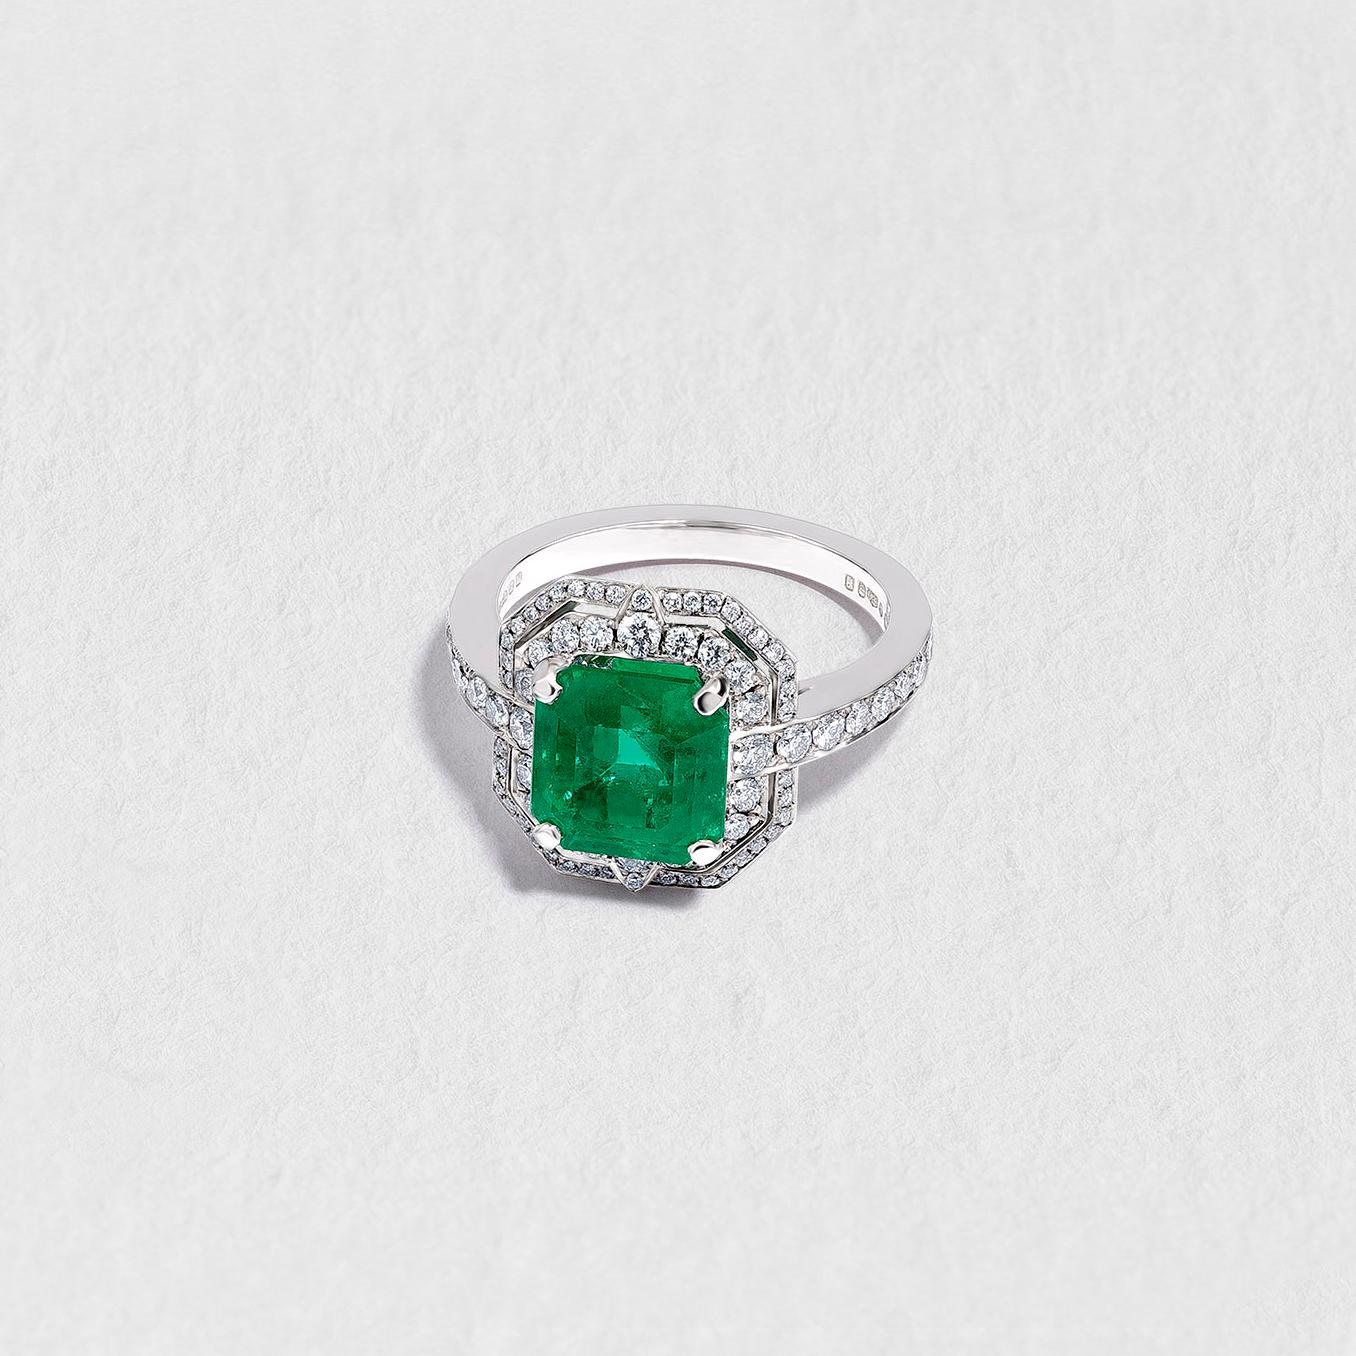 Certified 3.16 Carats Emerald Ring with White Diamonds Halo in Art Deco Style For Sale 3